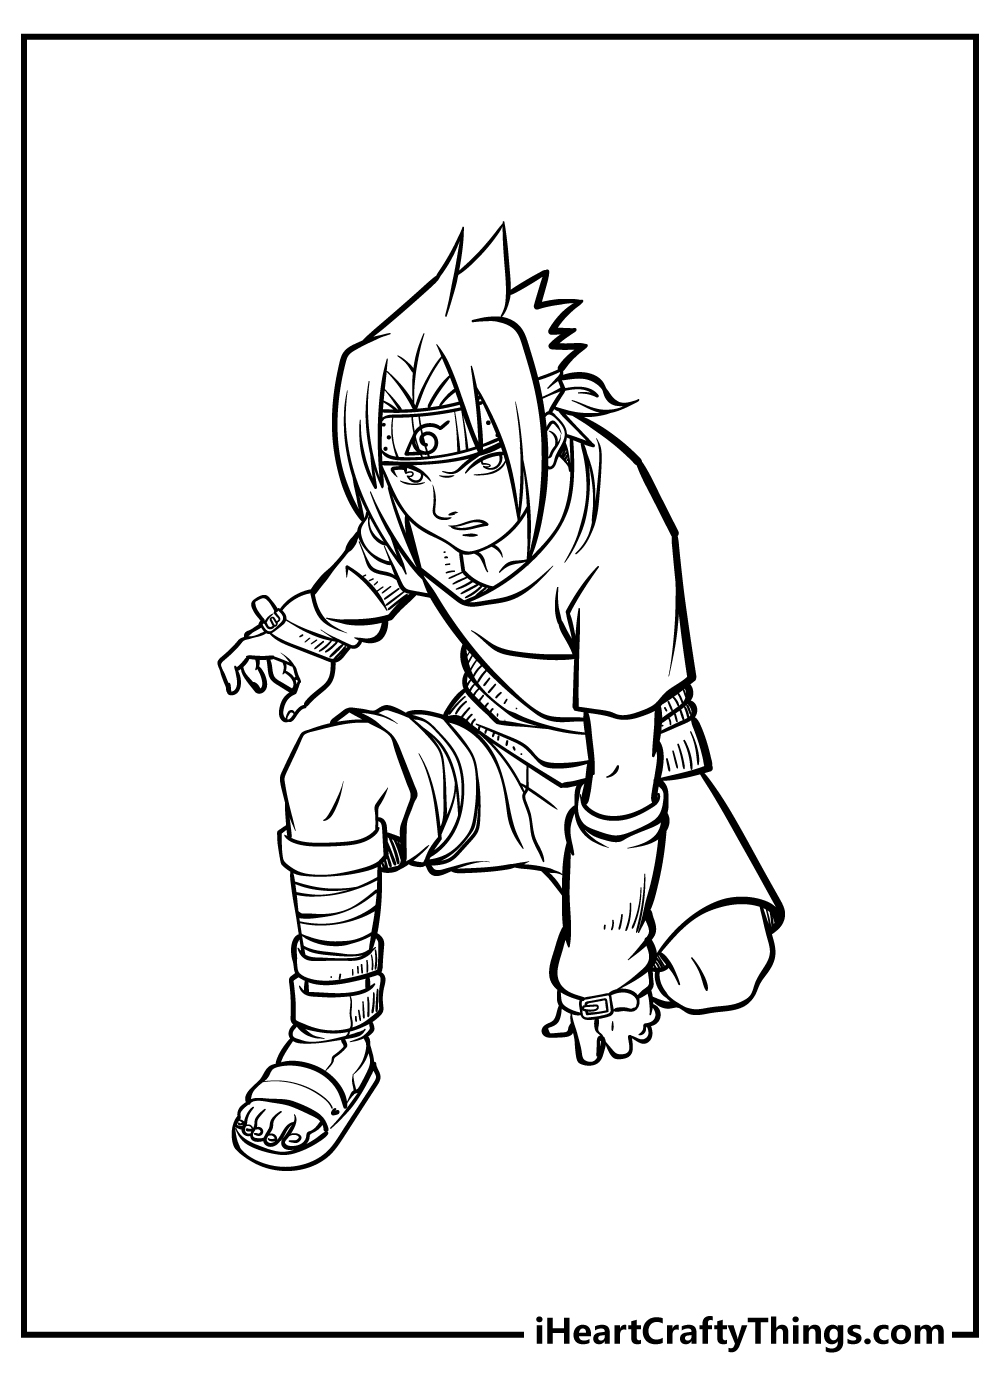 Anime Coloring Pages for download